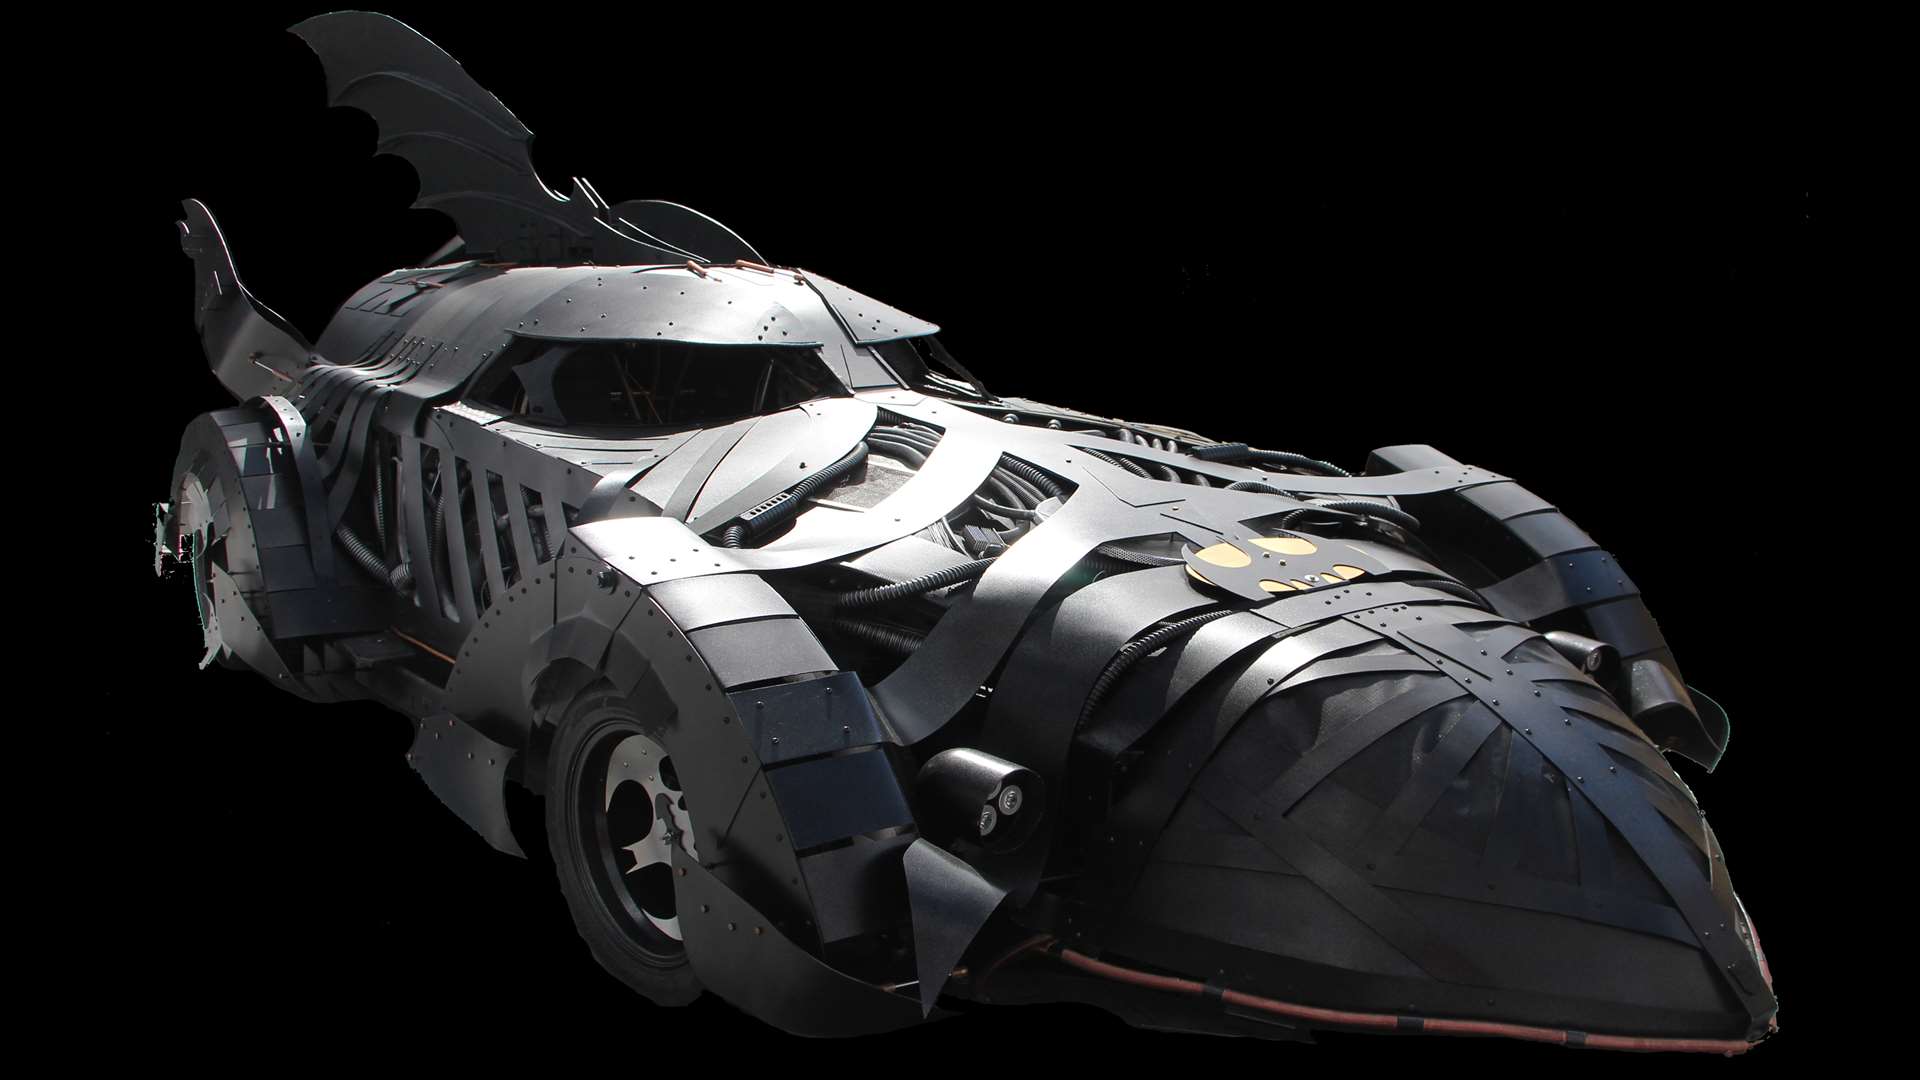 This Batmobile will be at Motors by the Moat